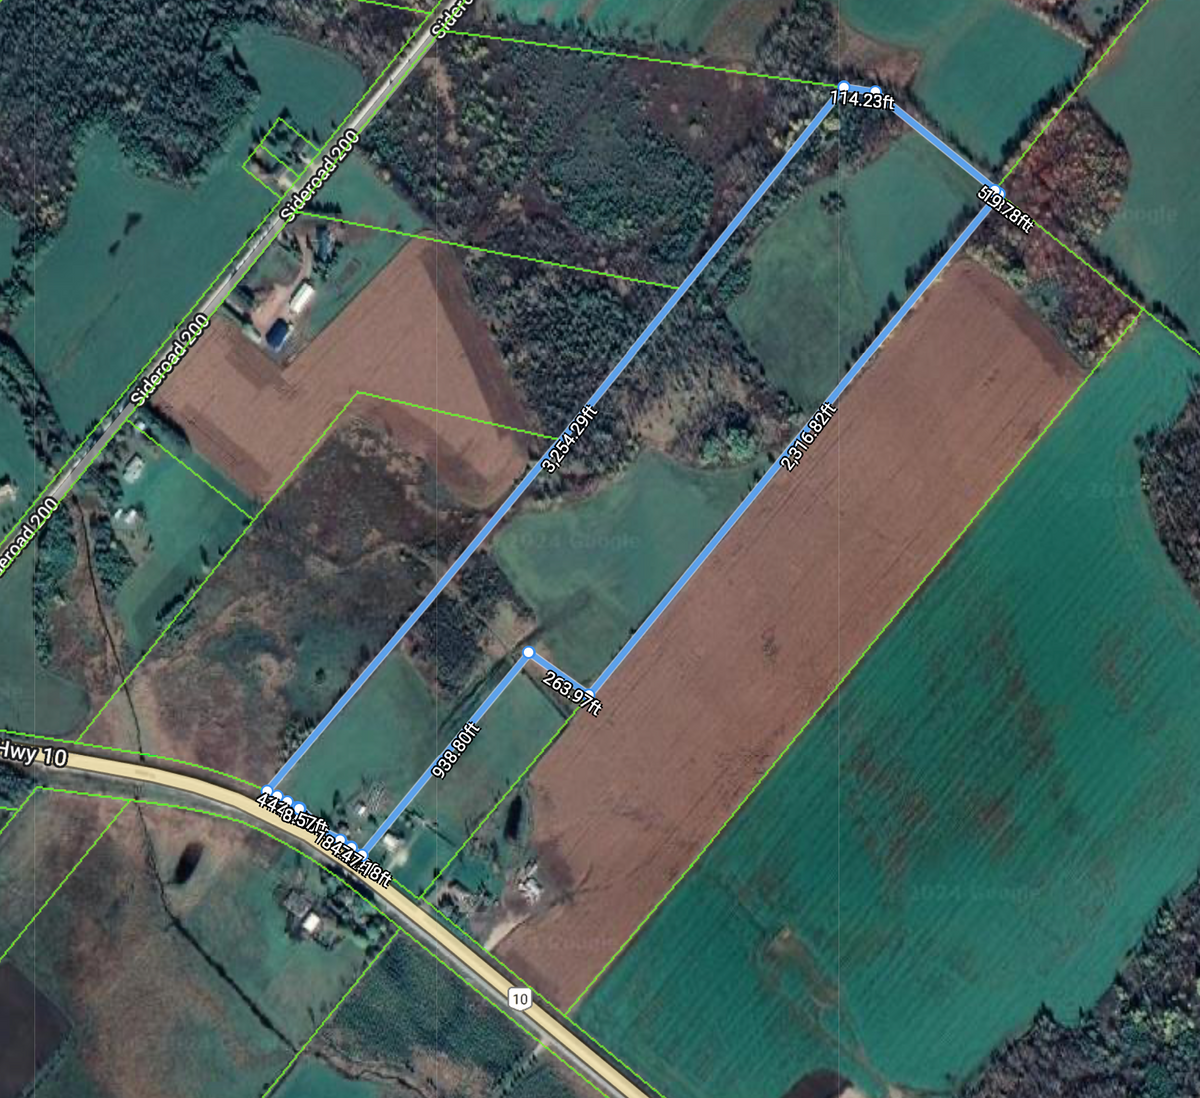 43.6 Acres Land with building